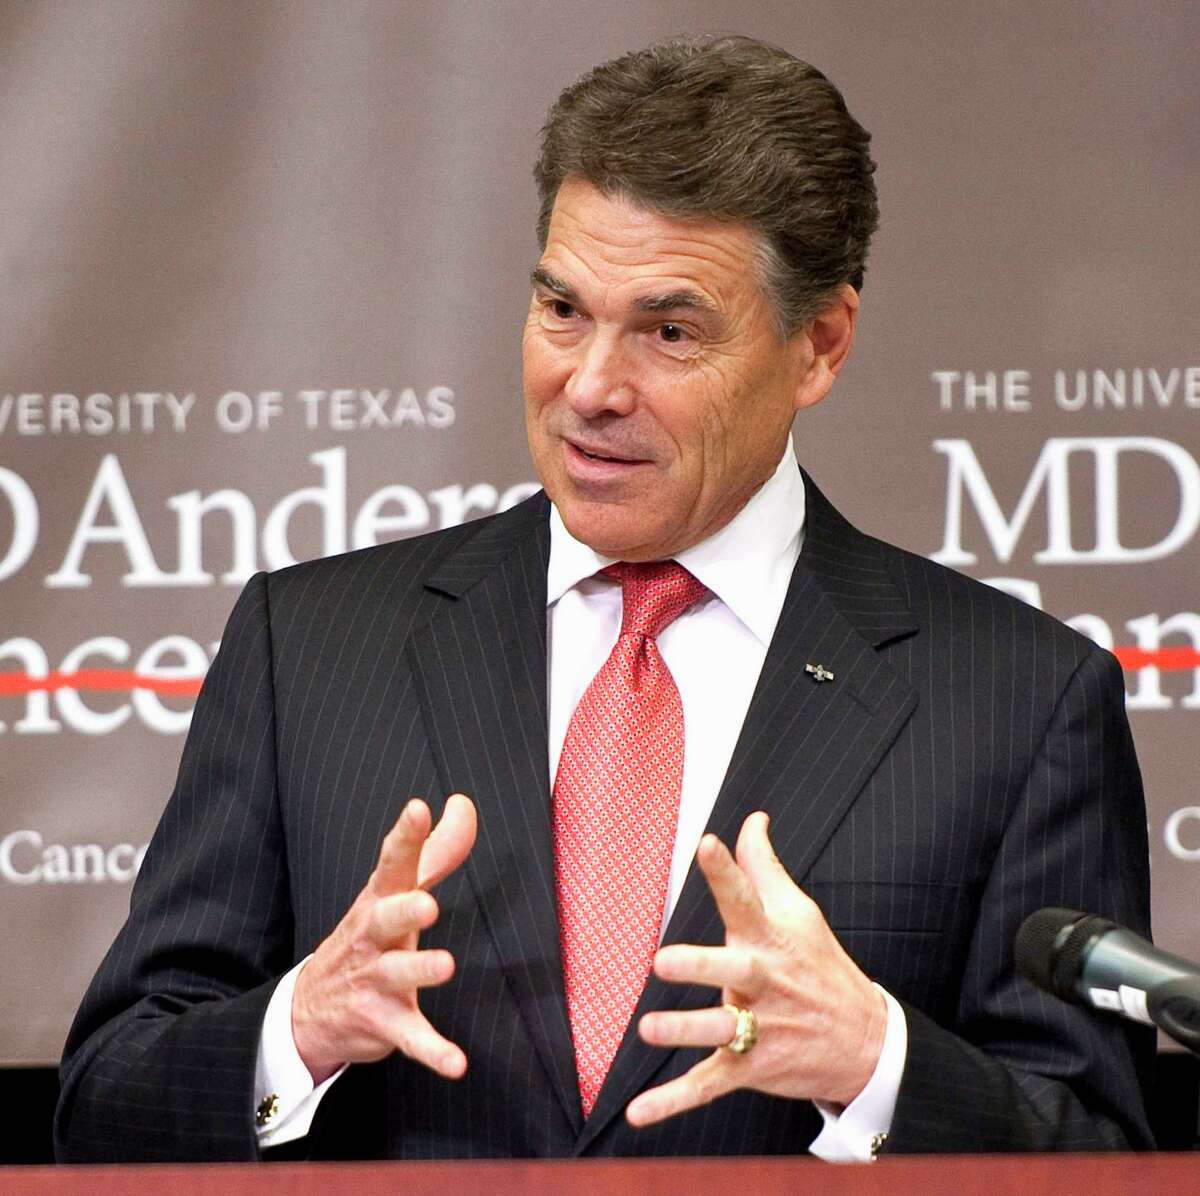 In this Nov. 28, 2011 file photo, Republican presidential candidate, Texas Gov. Rick Perry speaks in Houston. Rick Perry, though defending in-state tuition for illegal immigrants’ kids, campaigns with a hardline Arizona sheriff.